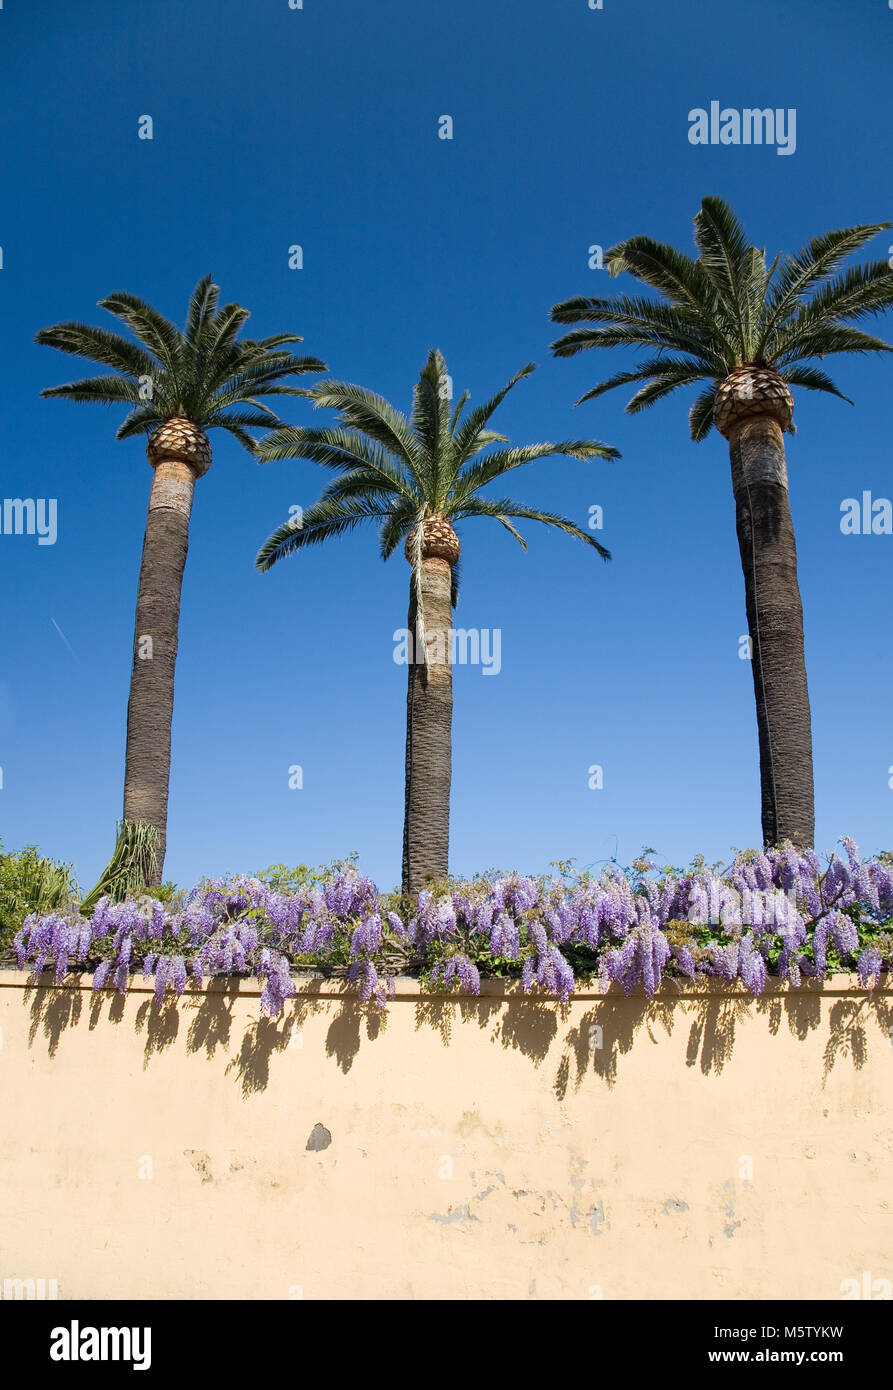 Three palm trees tower over a wisteria-topped wall in Sorrento, Italy. Stock Photo